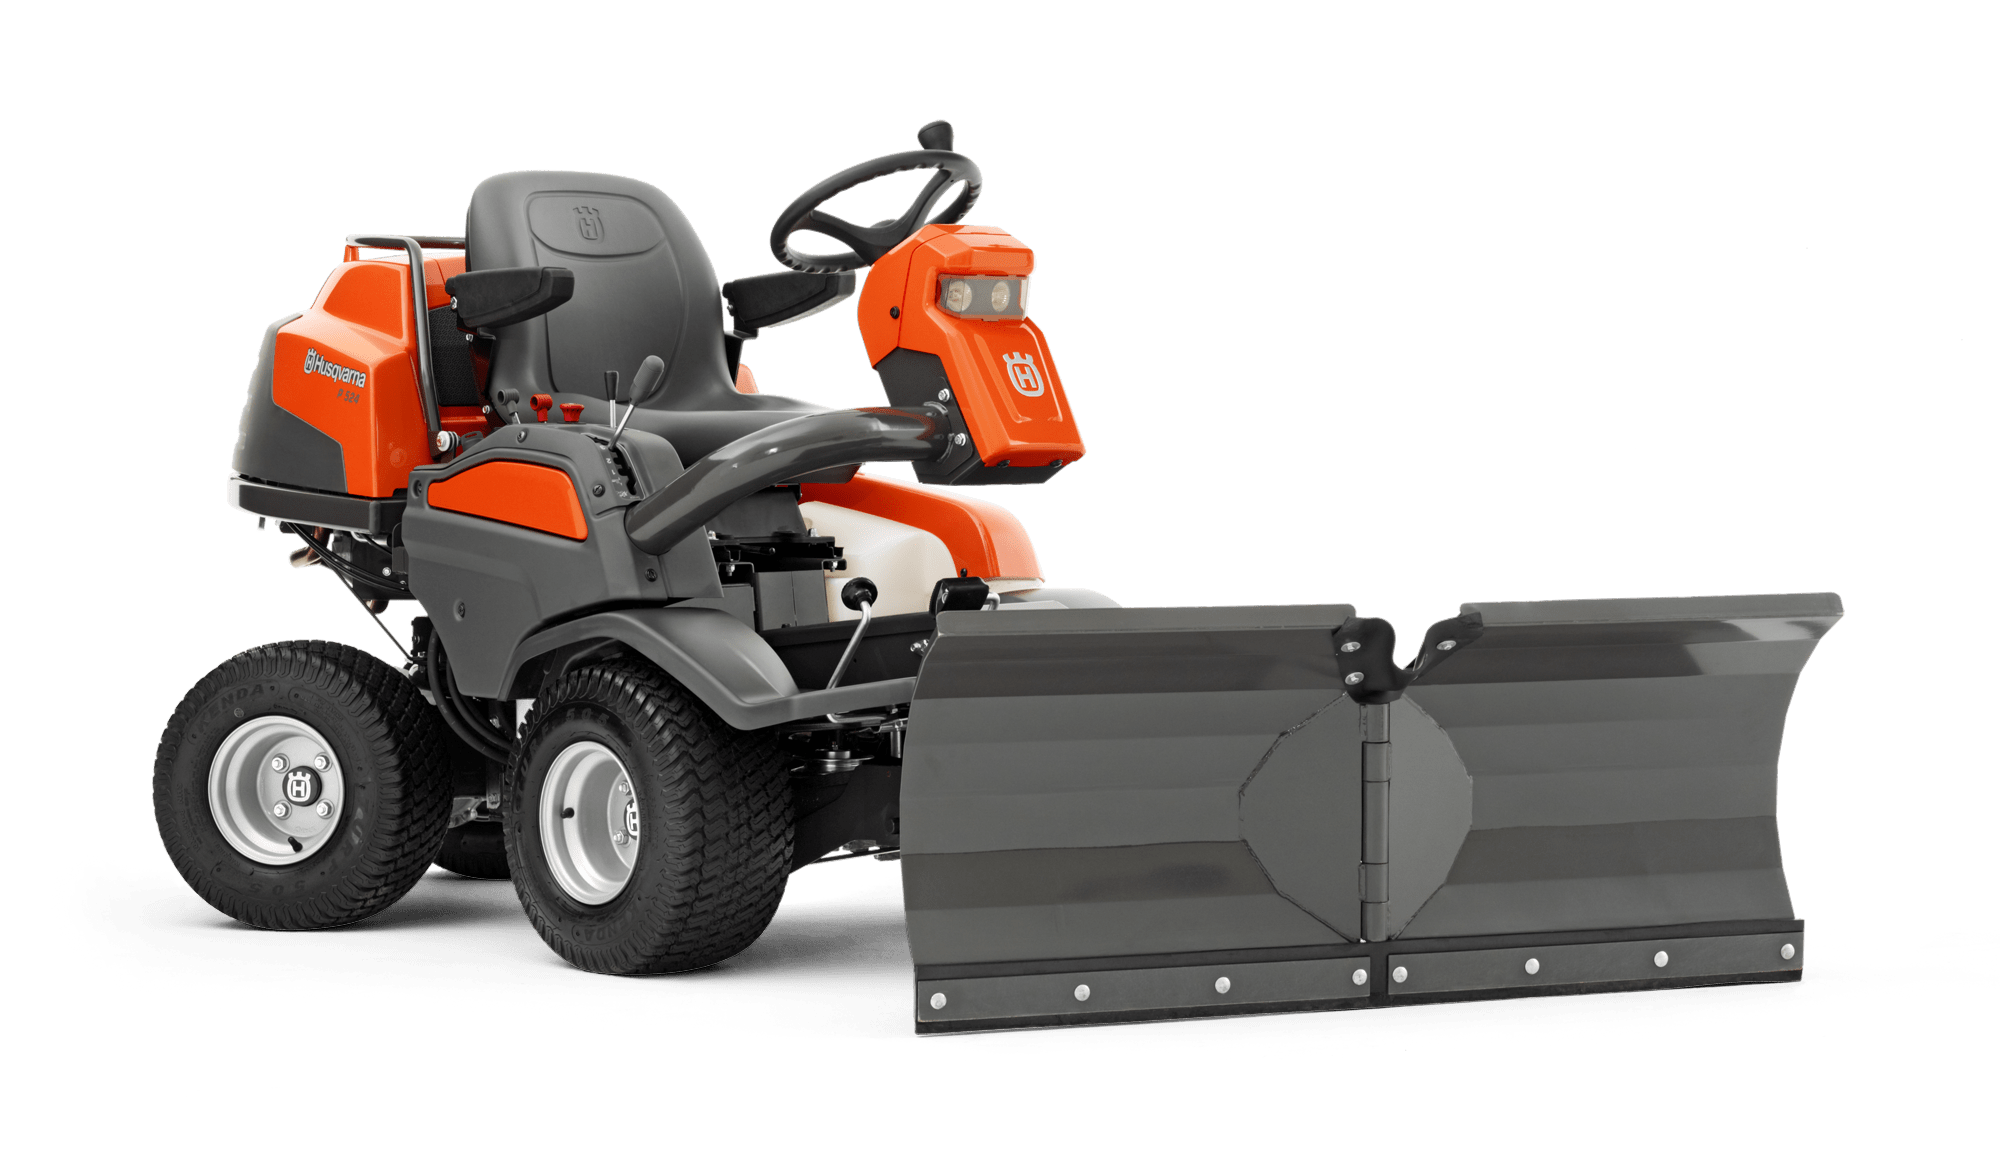 Front Mower P 524 with folding plough